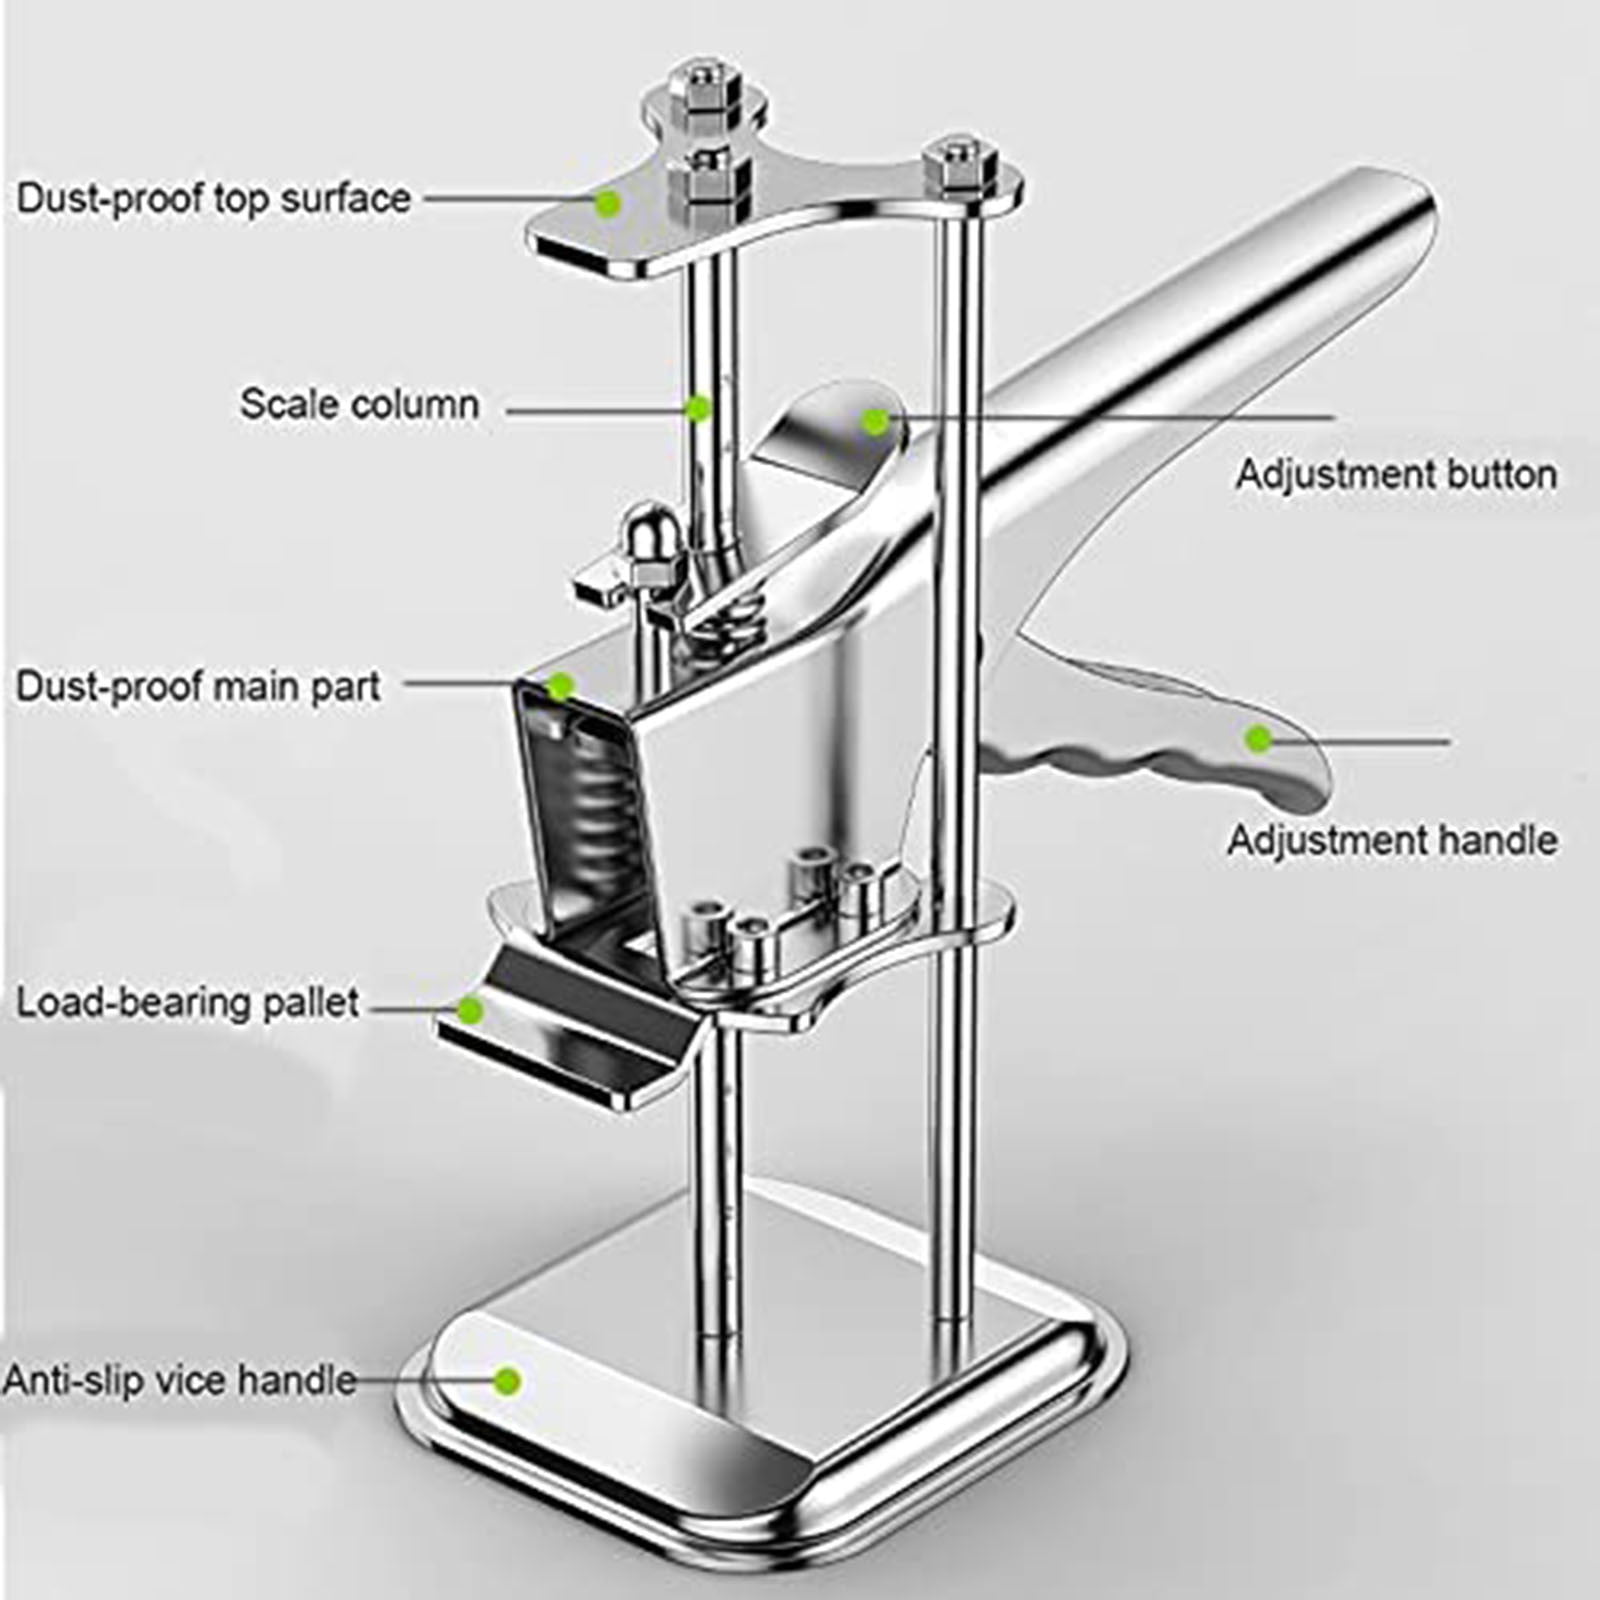 Details about    Steel Pirate Labor-saving Arm Leveling Lifter Kit Lifting Leveler 2021 